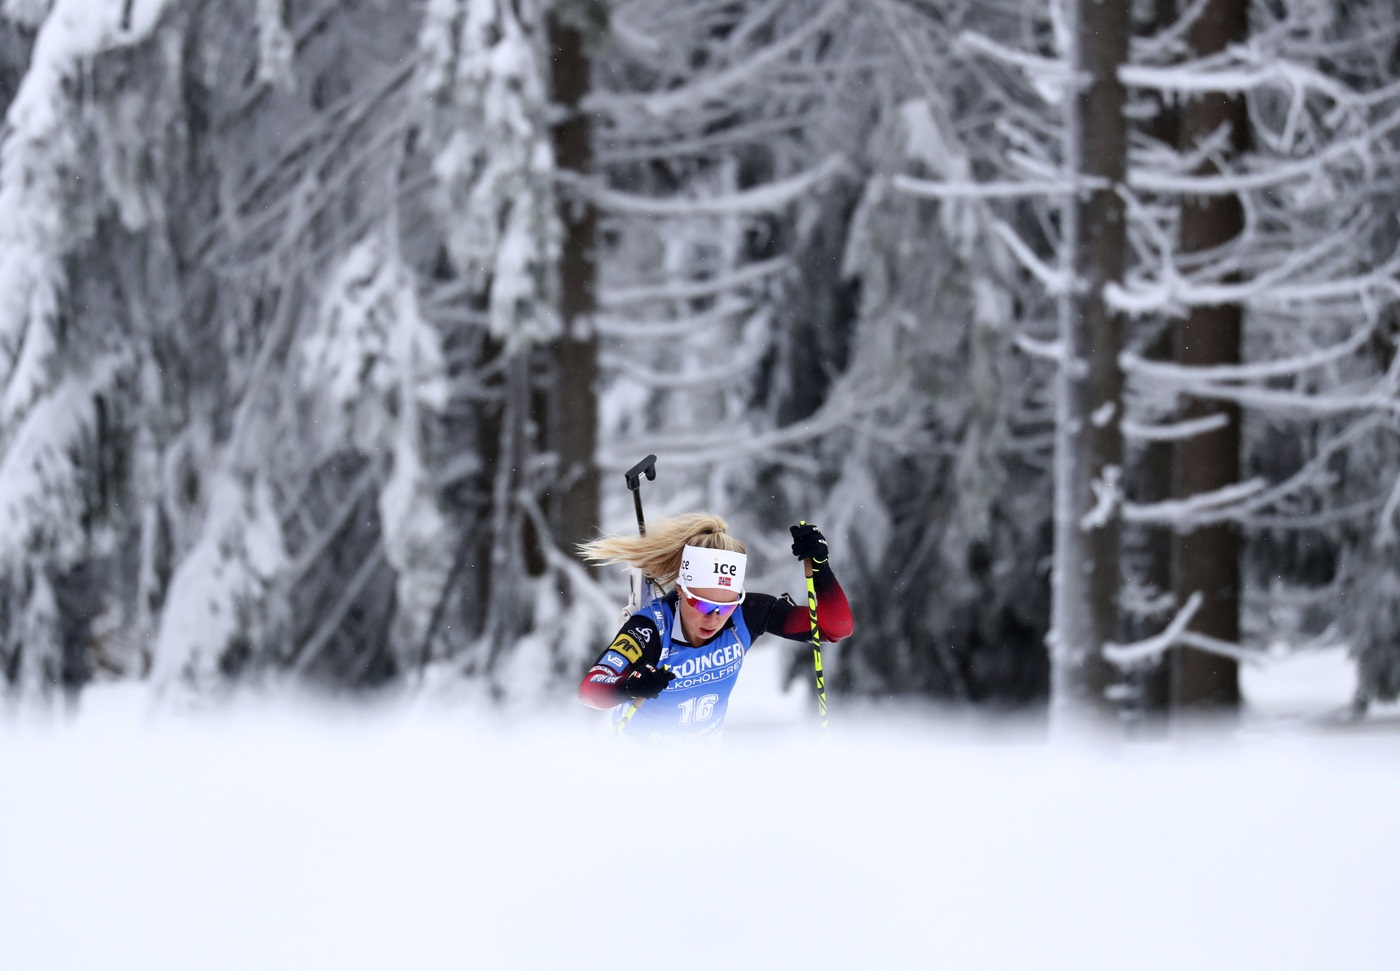 Norway's Tiril Eckhoff runs during the women's 7.5 km sprint race at the Biathlon World Cup in Oberhof, Germany, Friday, Jan. 8, 2021. (AP Photo/Matthias Schrader)